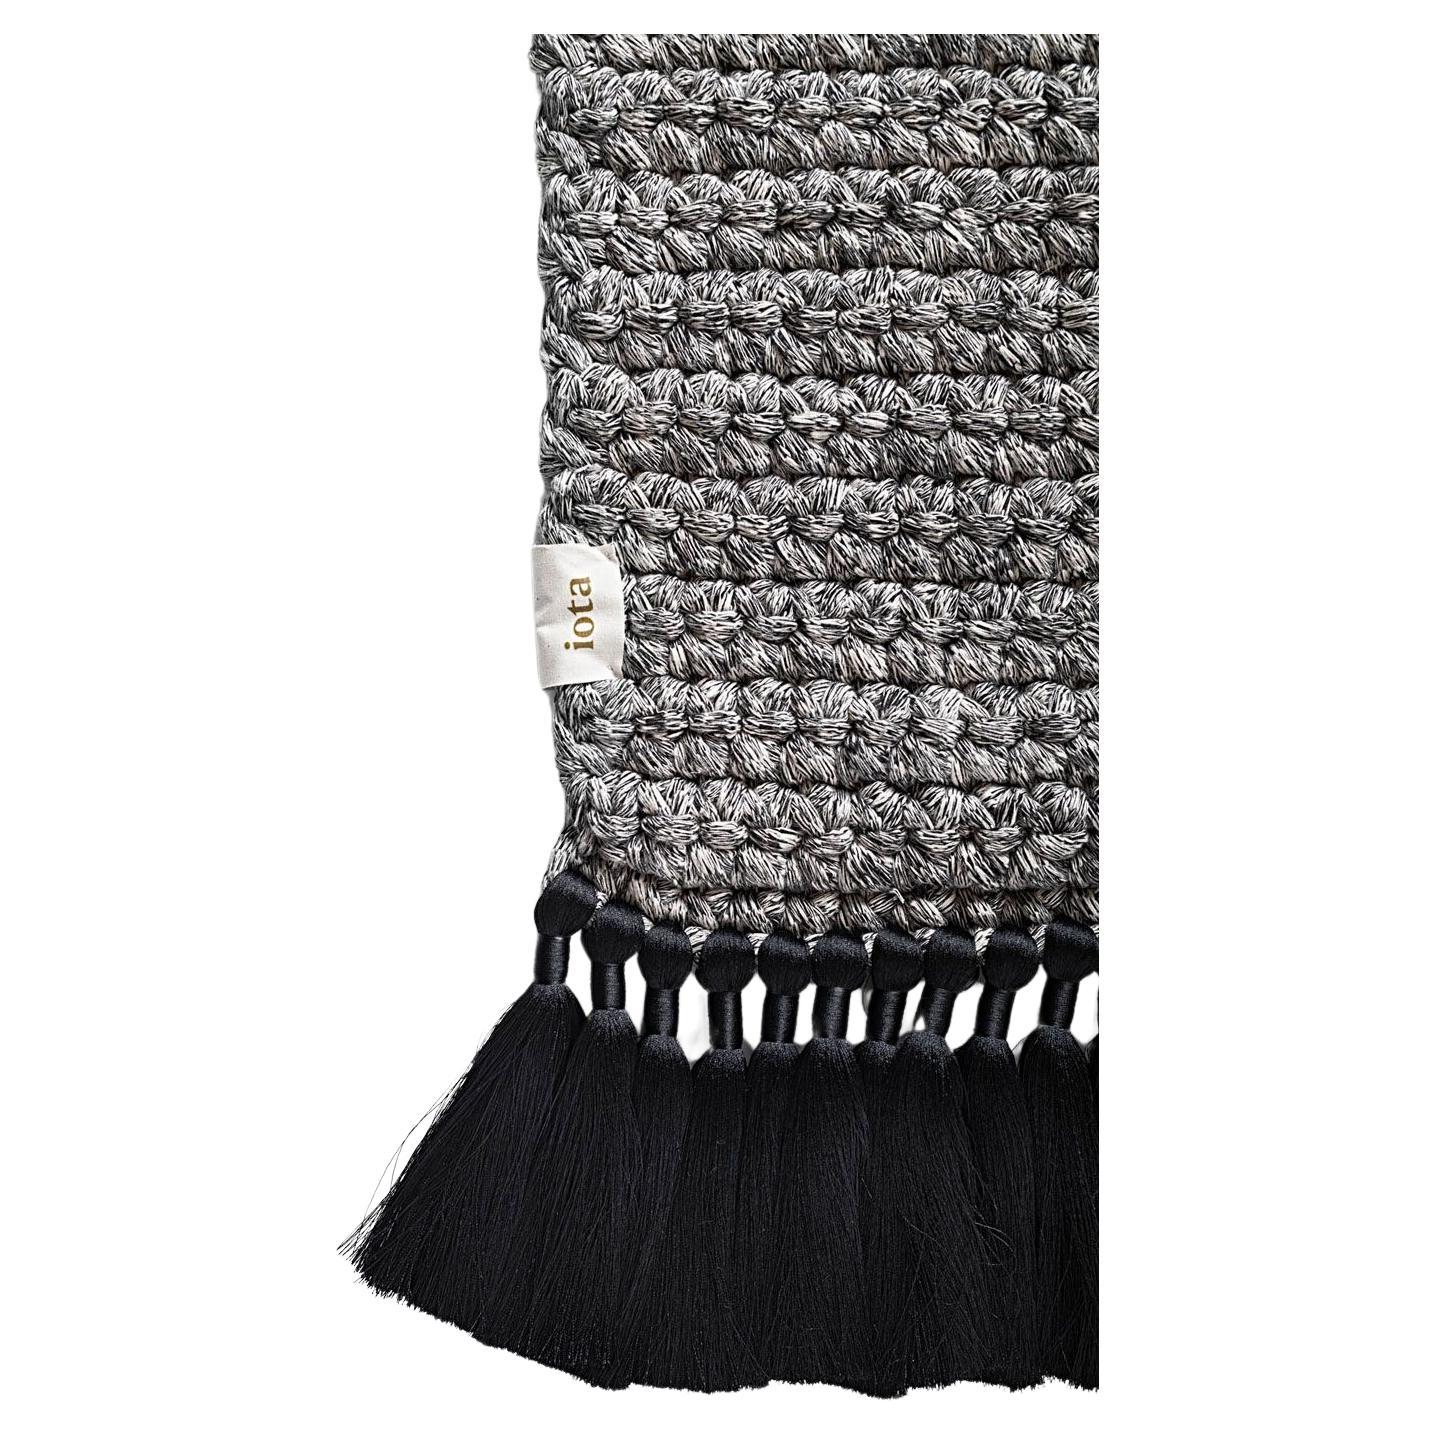 Handmade Crochet XL Thick Rug in Grey Black White Made of Cotton & Polyester